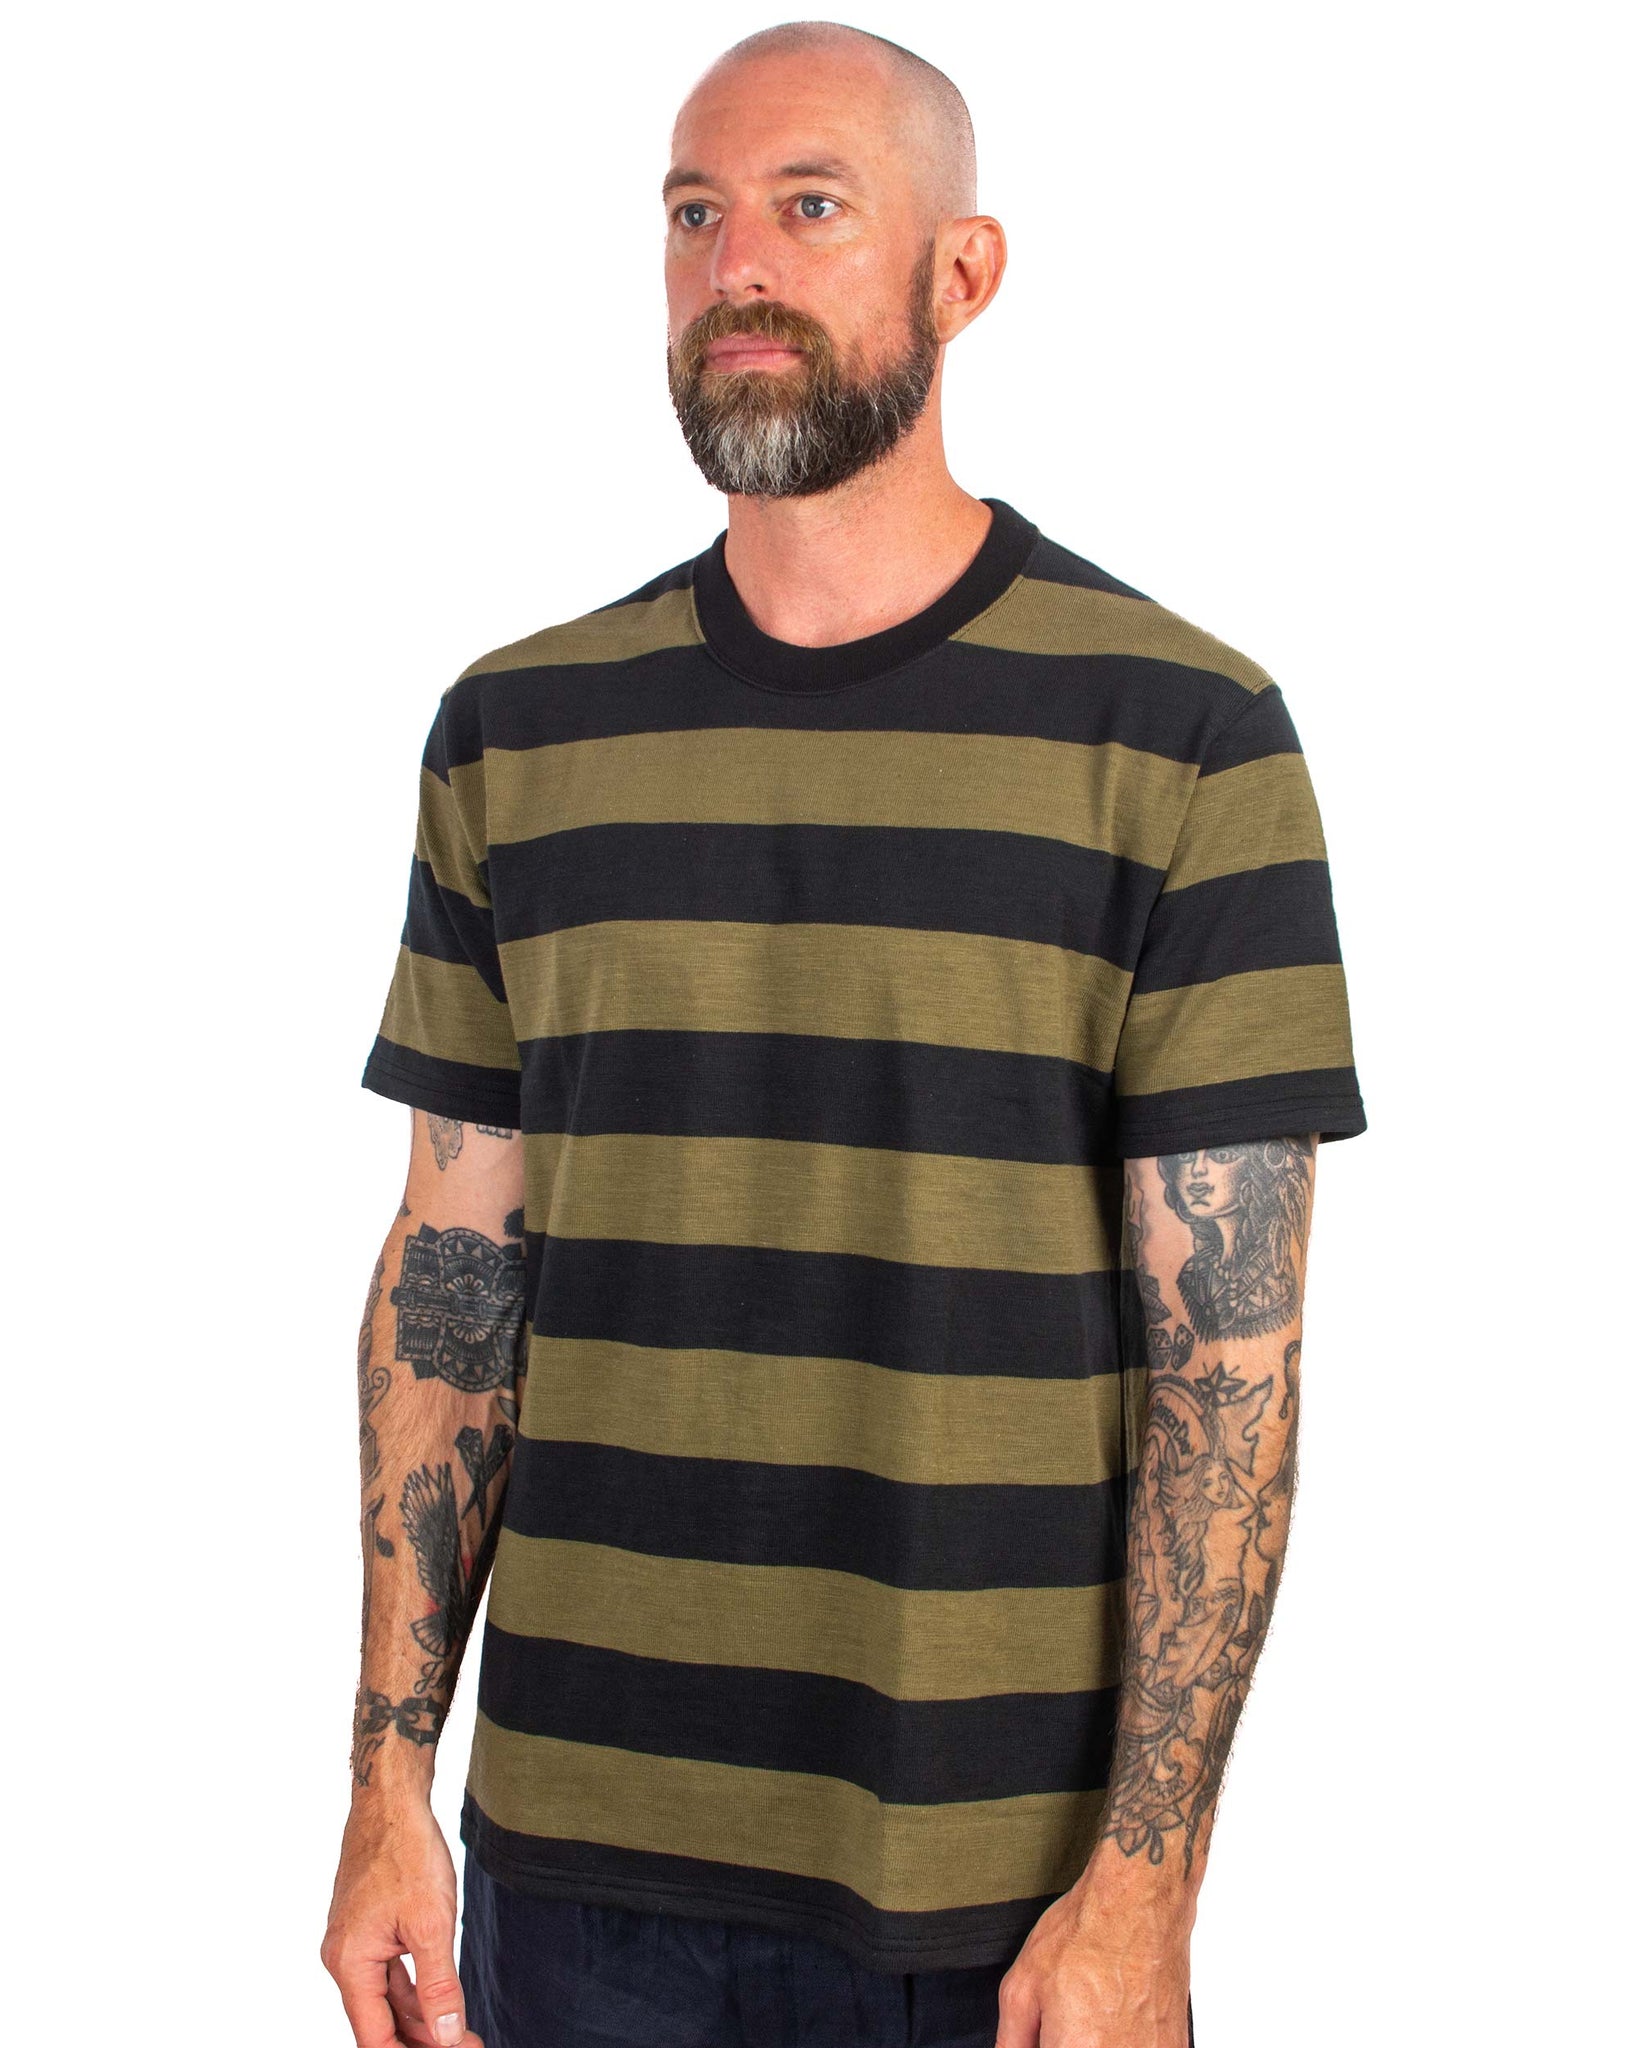 The Real McCoy's BC20007 Buco Stripe Tee S/S Olive Close